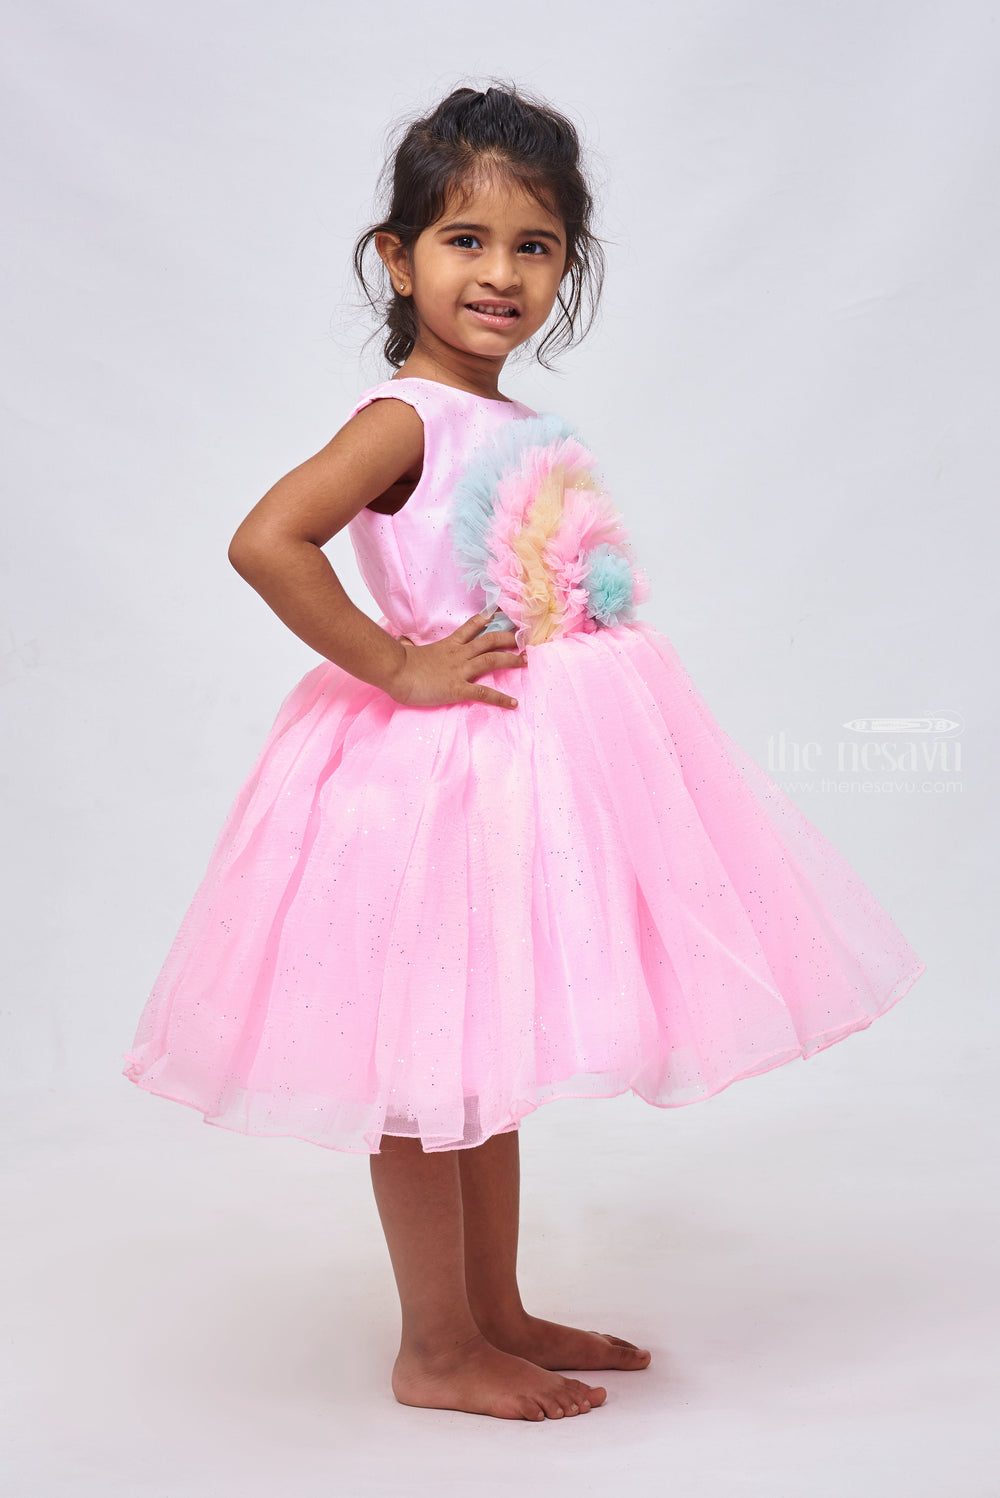 The Nesavu Girls Tutu Frock Petal Pink Parade: Multicolor Layered Party Frock with Vibrant Applique Designs Nesavu Birthday Girl Outfit Frock Selections | Trendy Dresses for Little Girls | The Nesavu